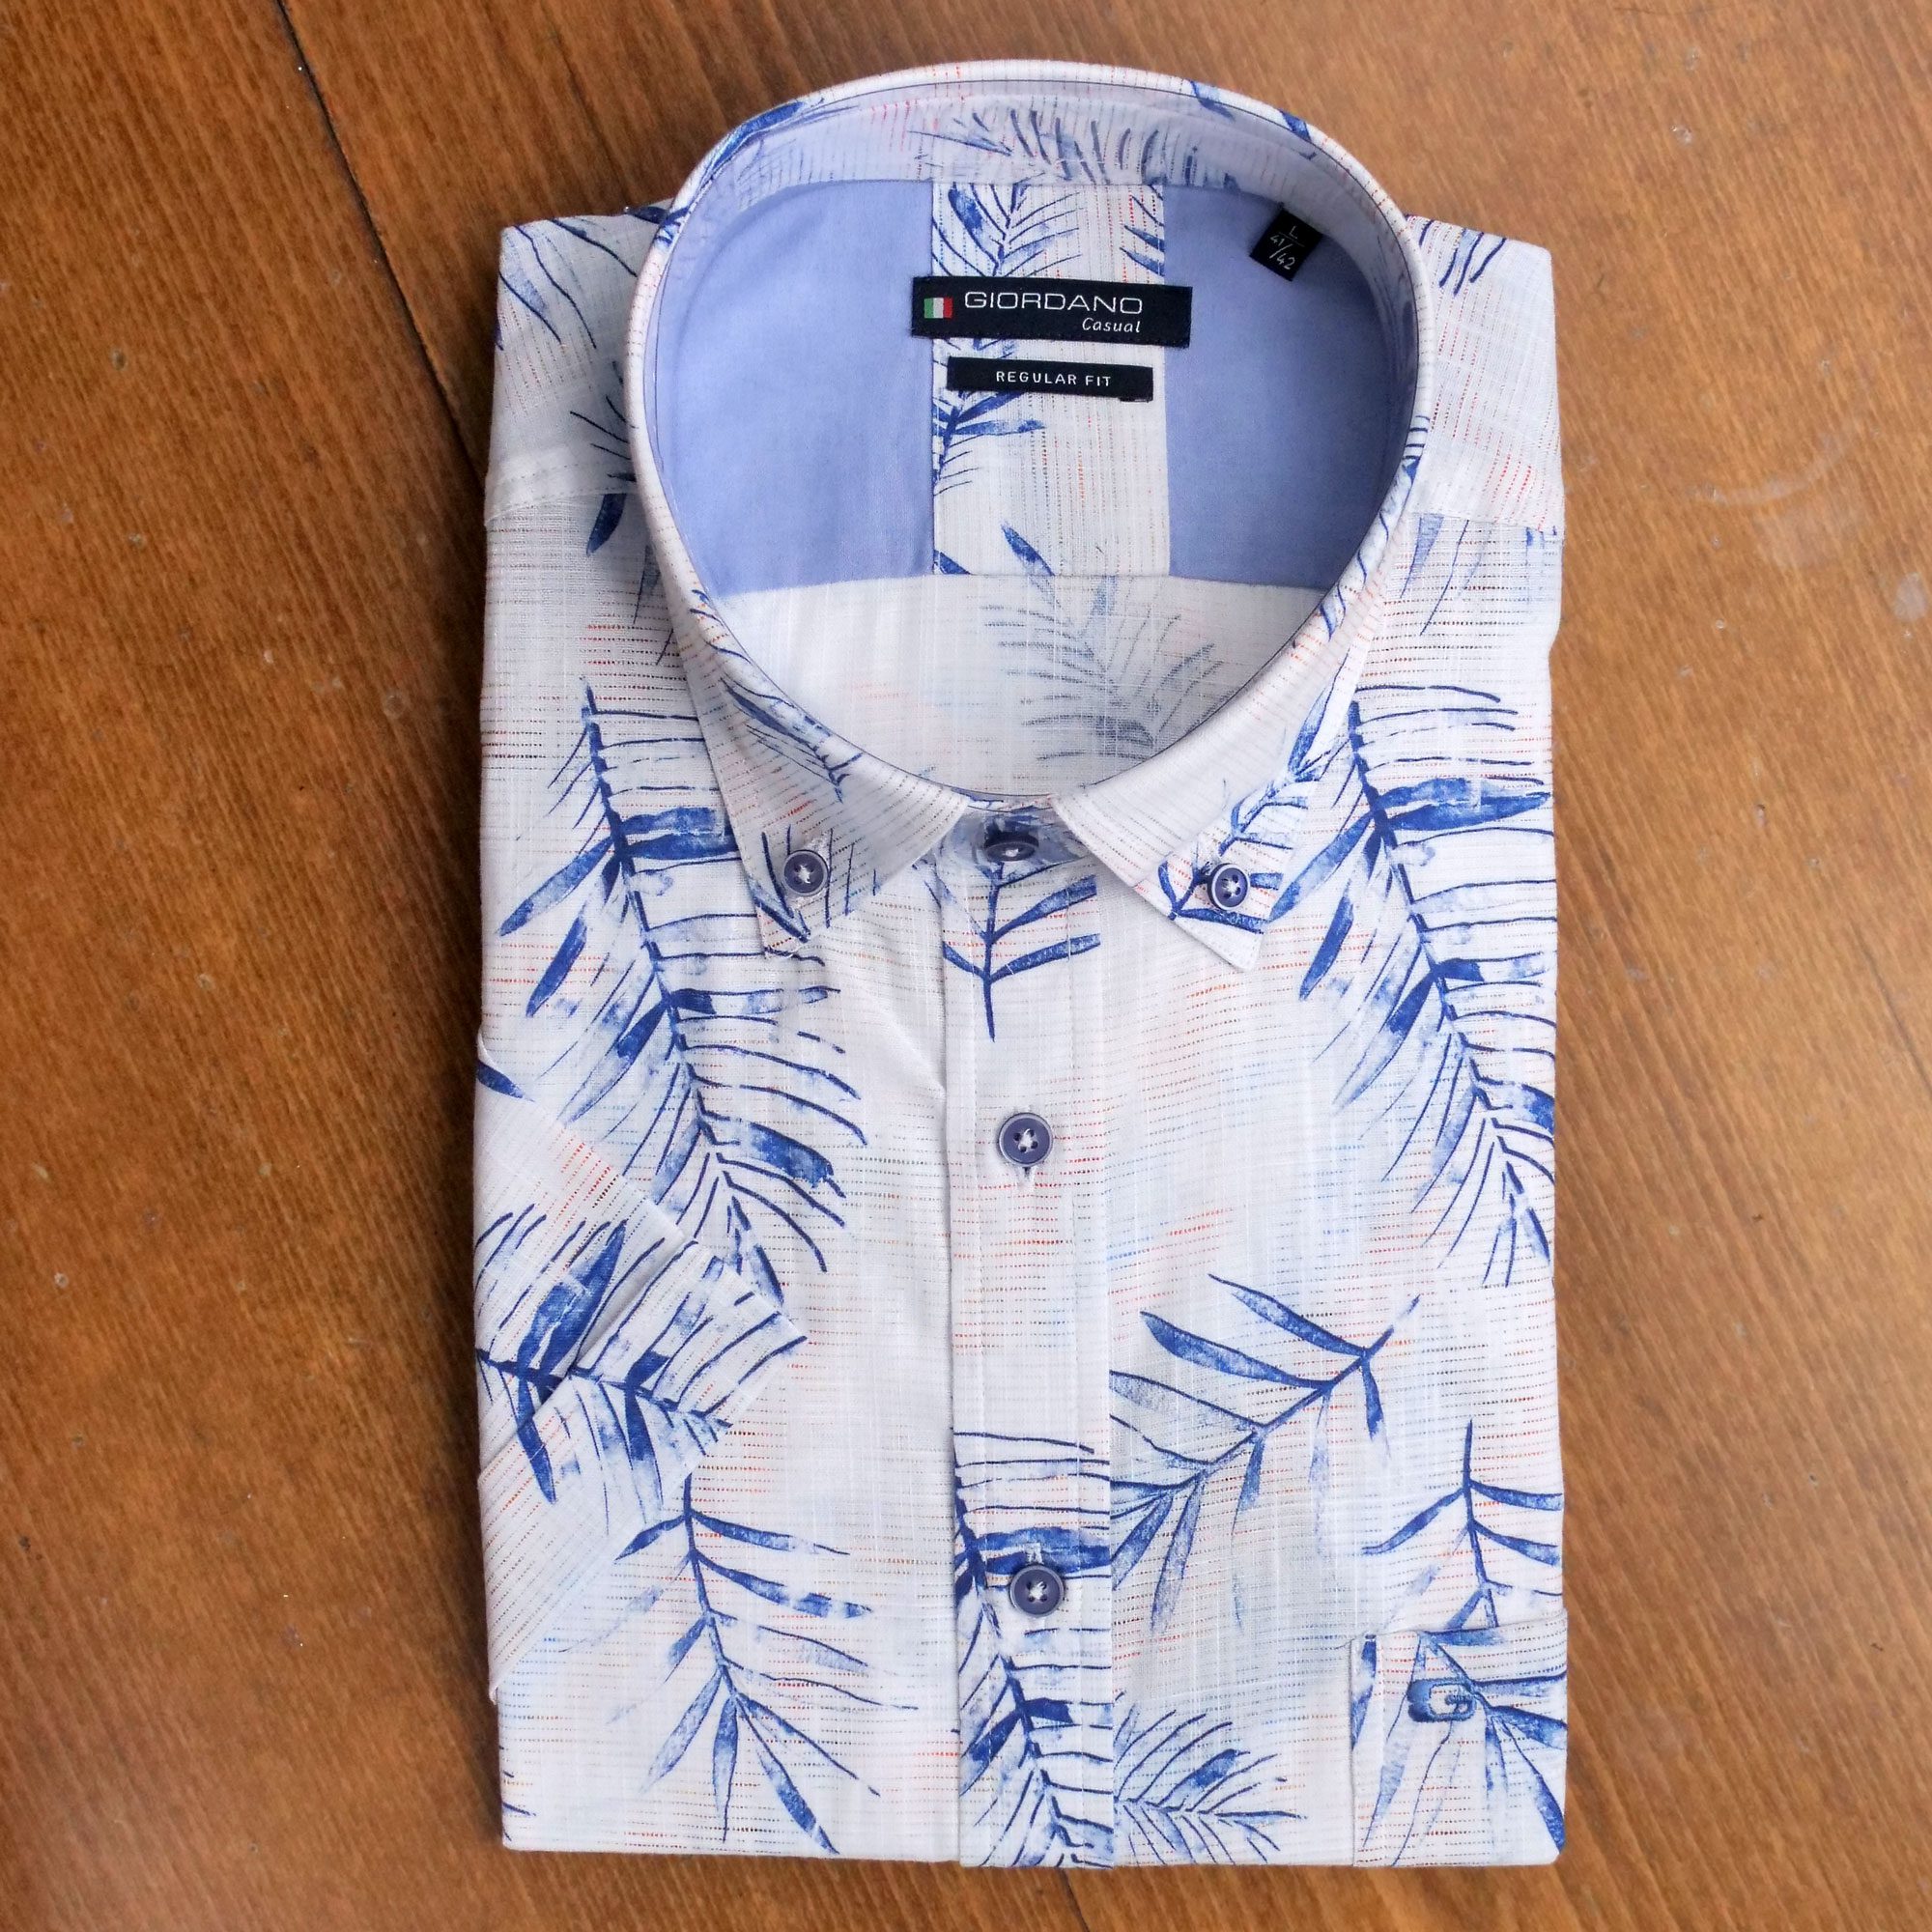 Giordano shirt with blue ferns on a faint red and blue pattern on white ...